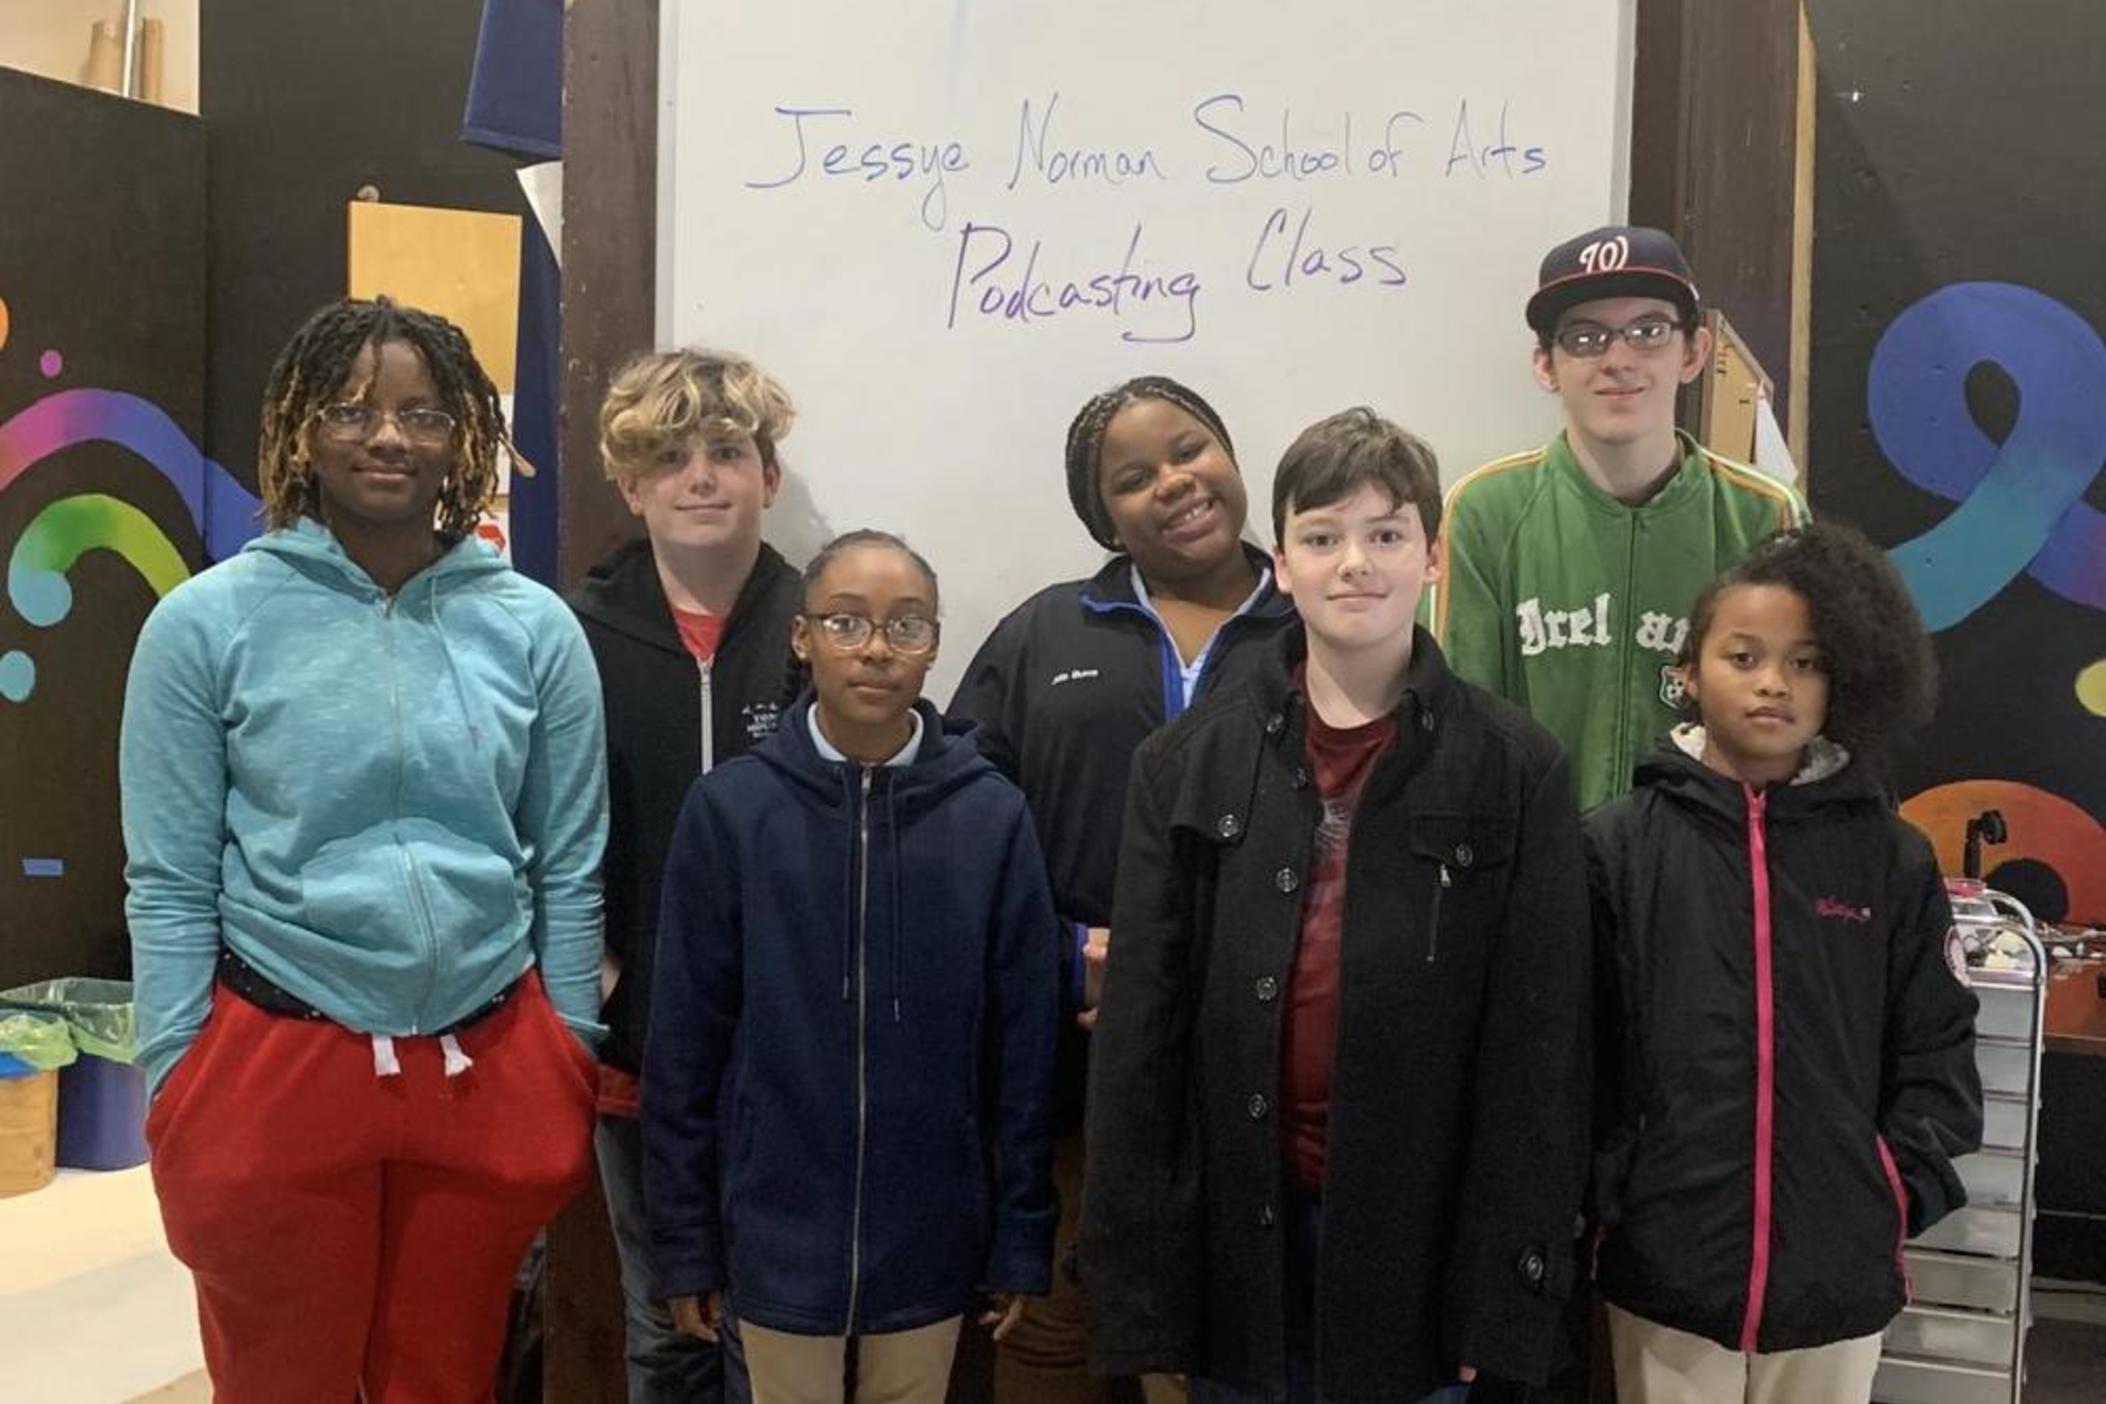 Students from the Jessye Norman School of the Arts, who are reporting for the podcast (l to r): Essence Willingham, Atticus Dillard-Wright, Kaleisha Sullivan, Jalia Burns, Aiden Allen, Thomas Collins, and Gabbie Stallings.